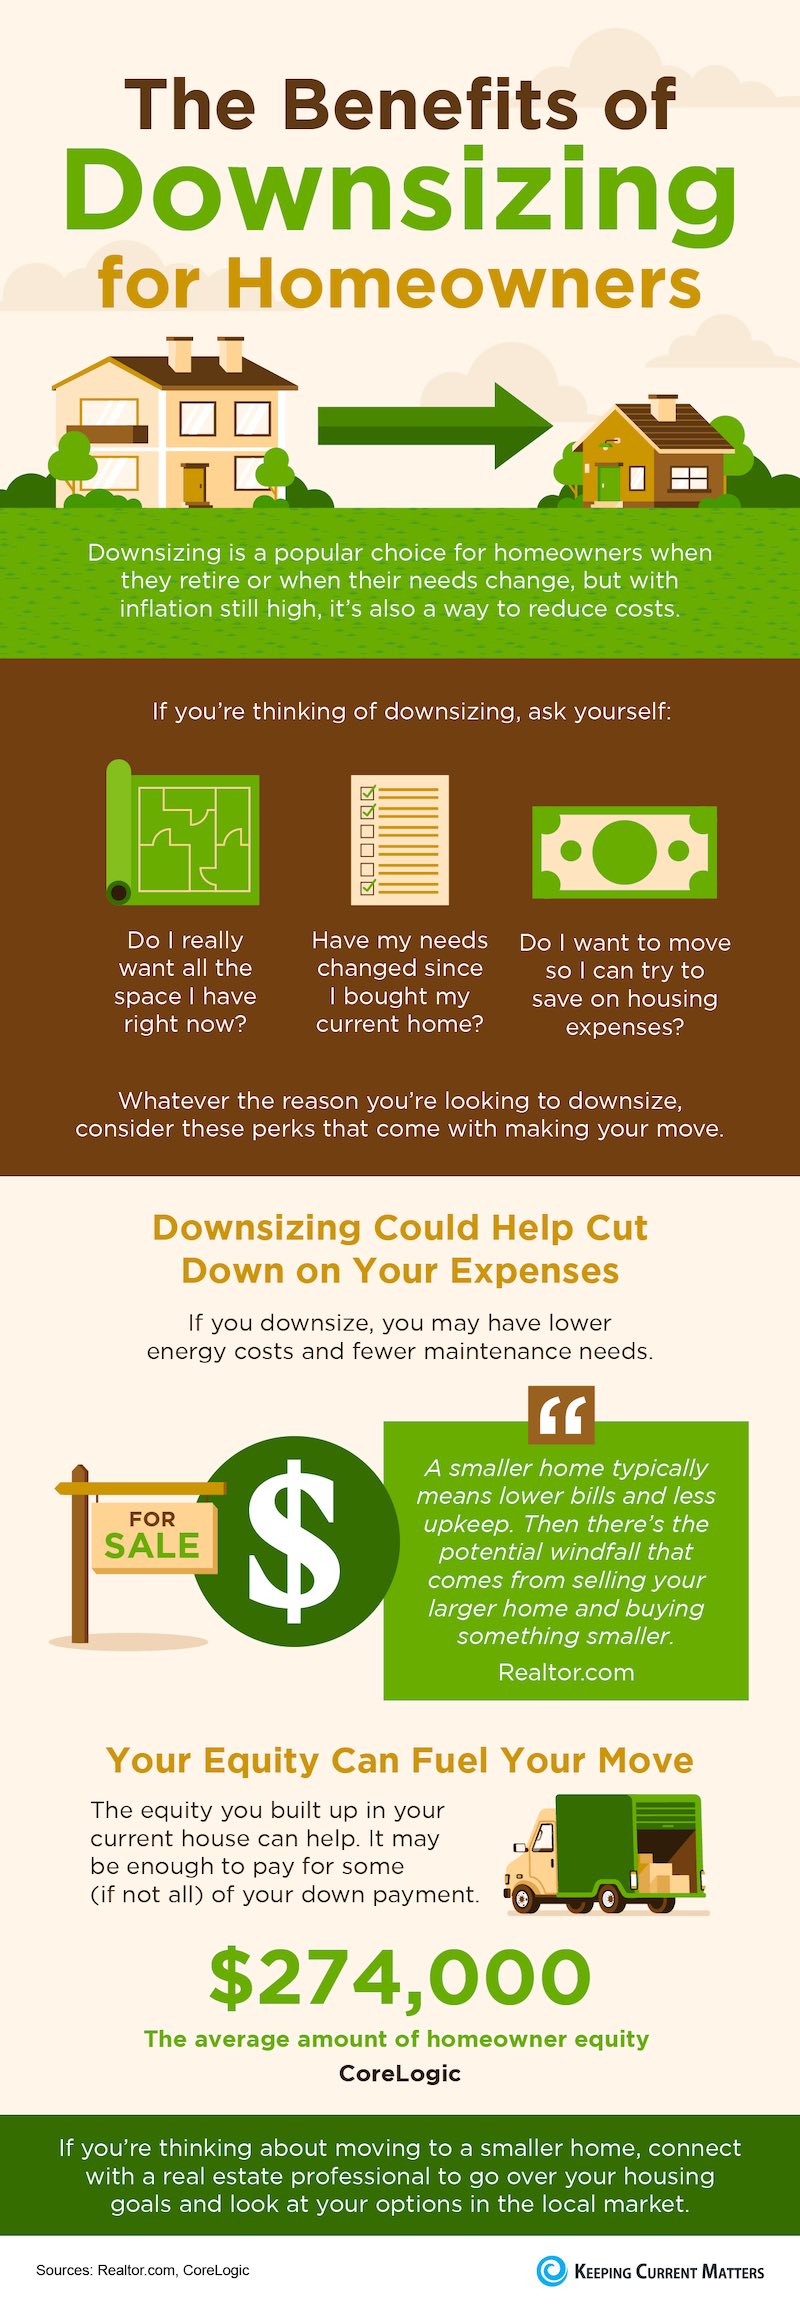 The Benefits of Downsizing for Homeowners